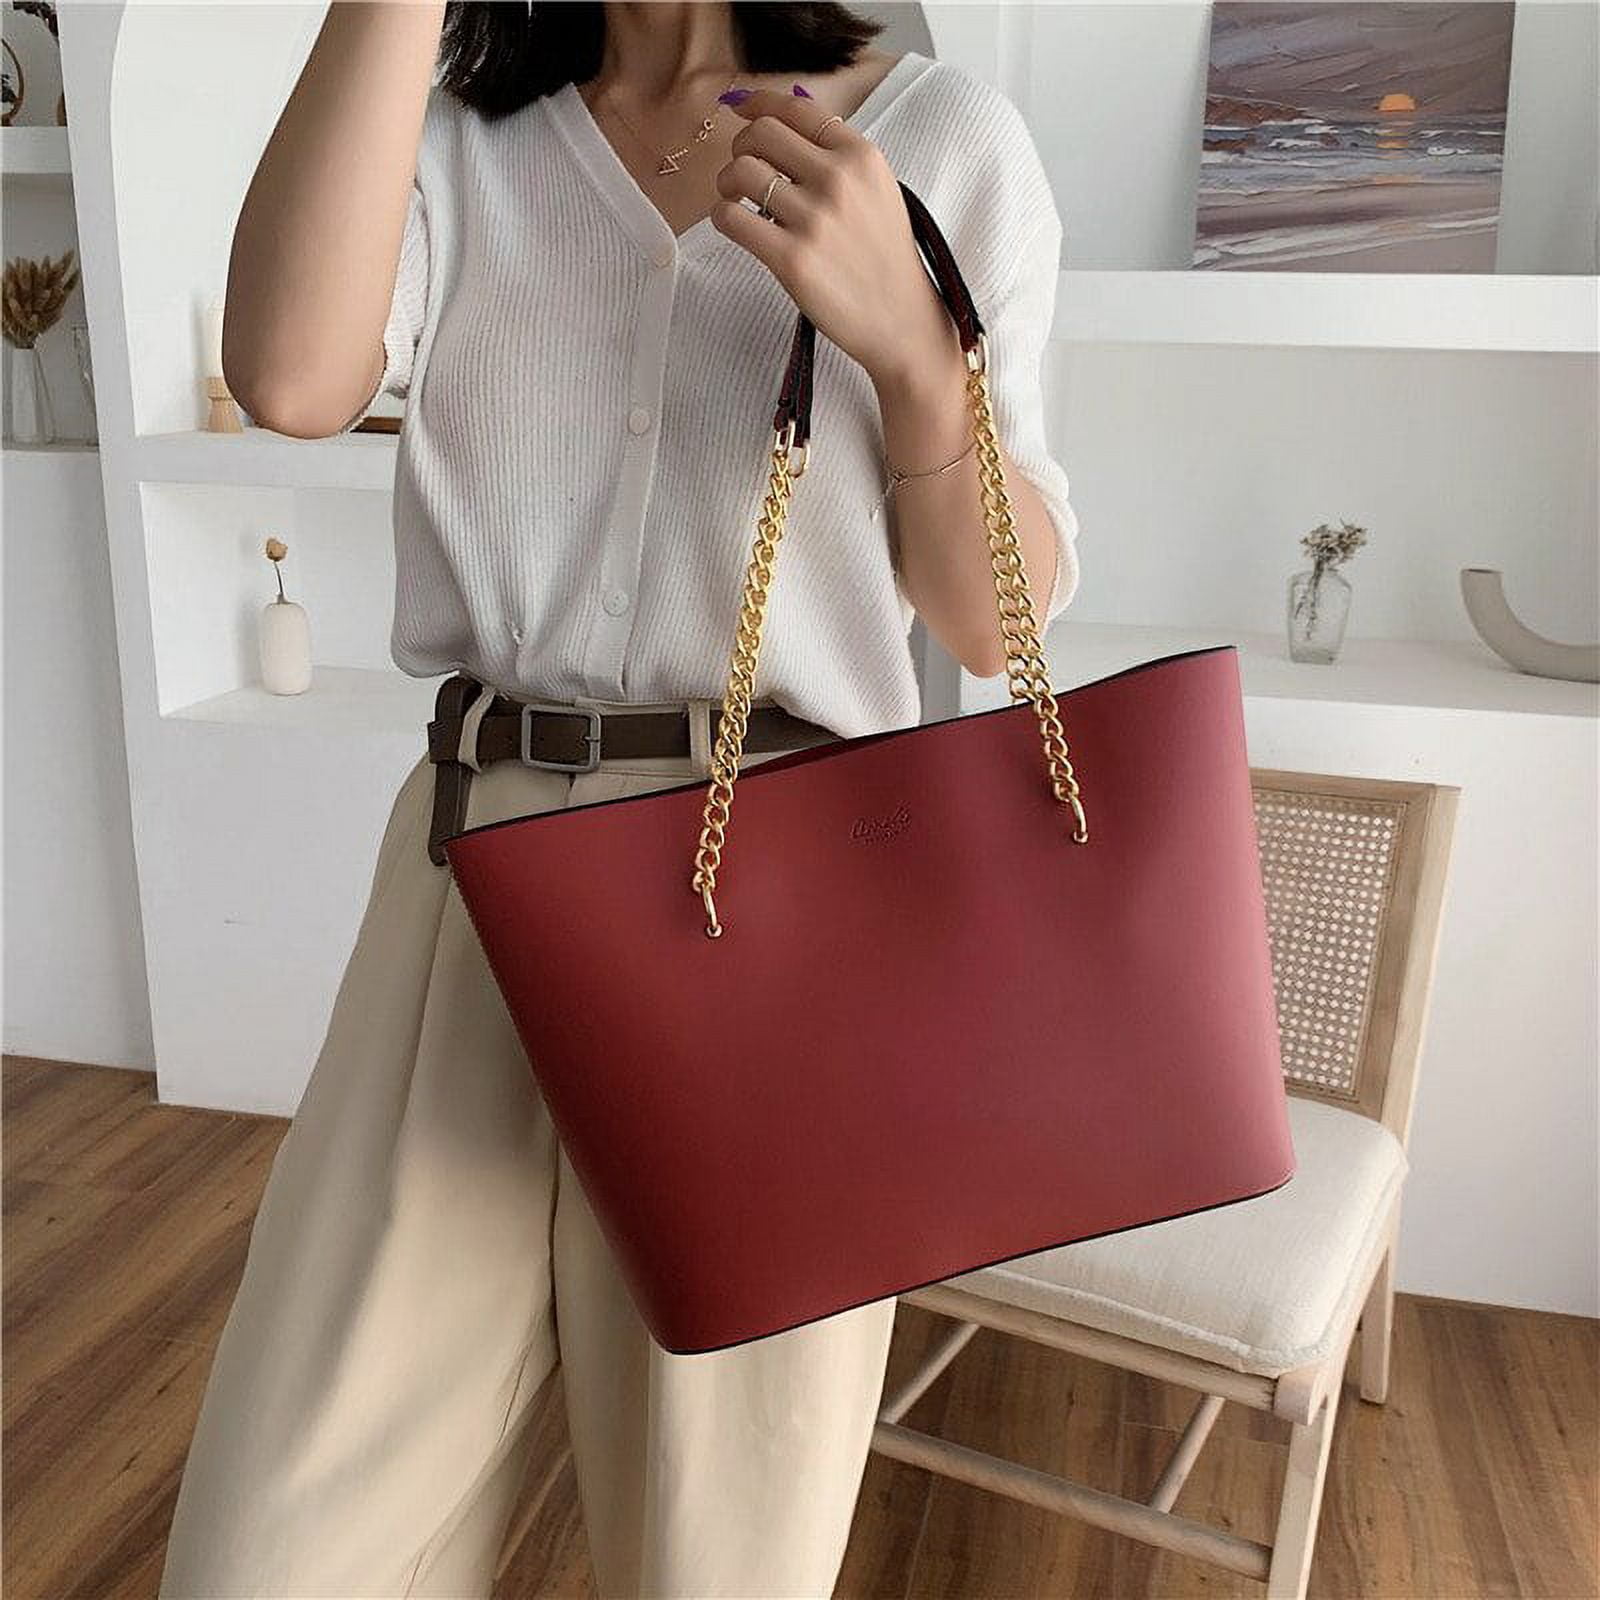 Cocopeaunt Luxury Handbags Women Bags Designer PU Soft Leather Shoulder Bags for Women Famous Brand Fashion Luxe Woman Bag Kabelka Sac, Adult Unisex